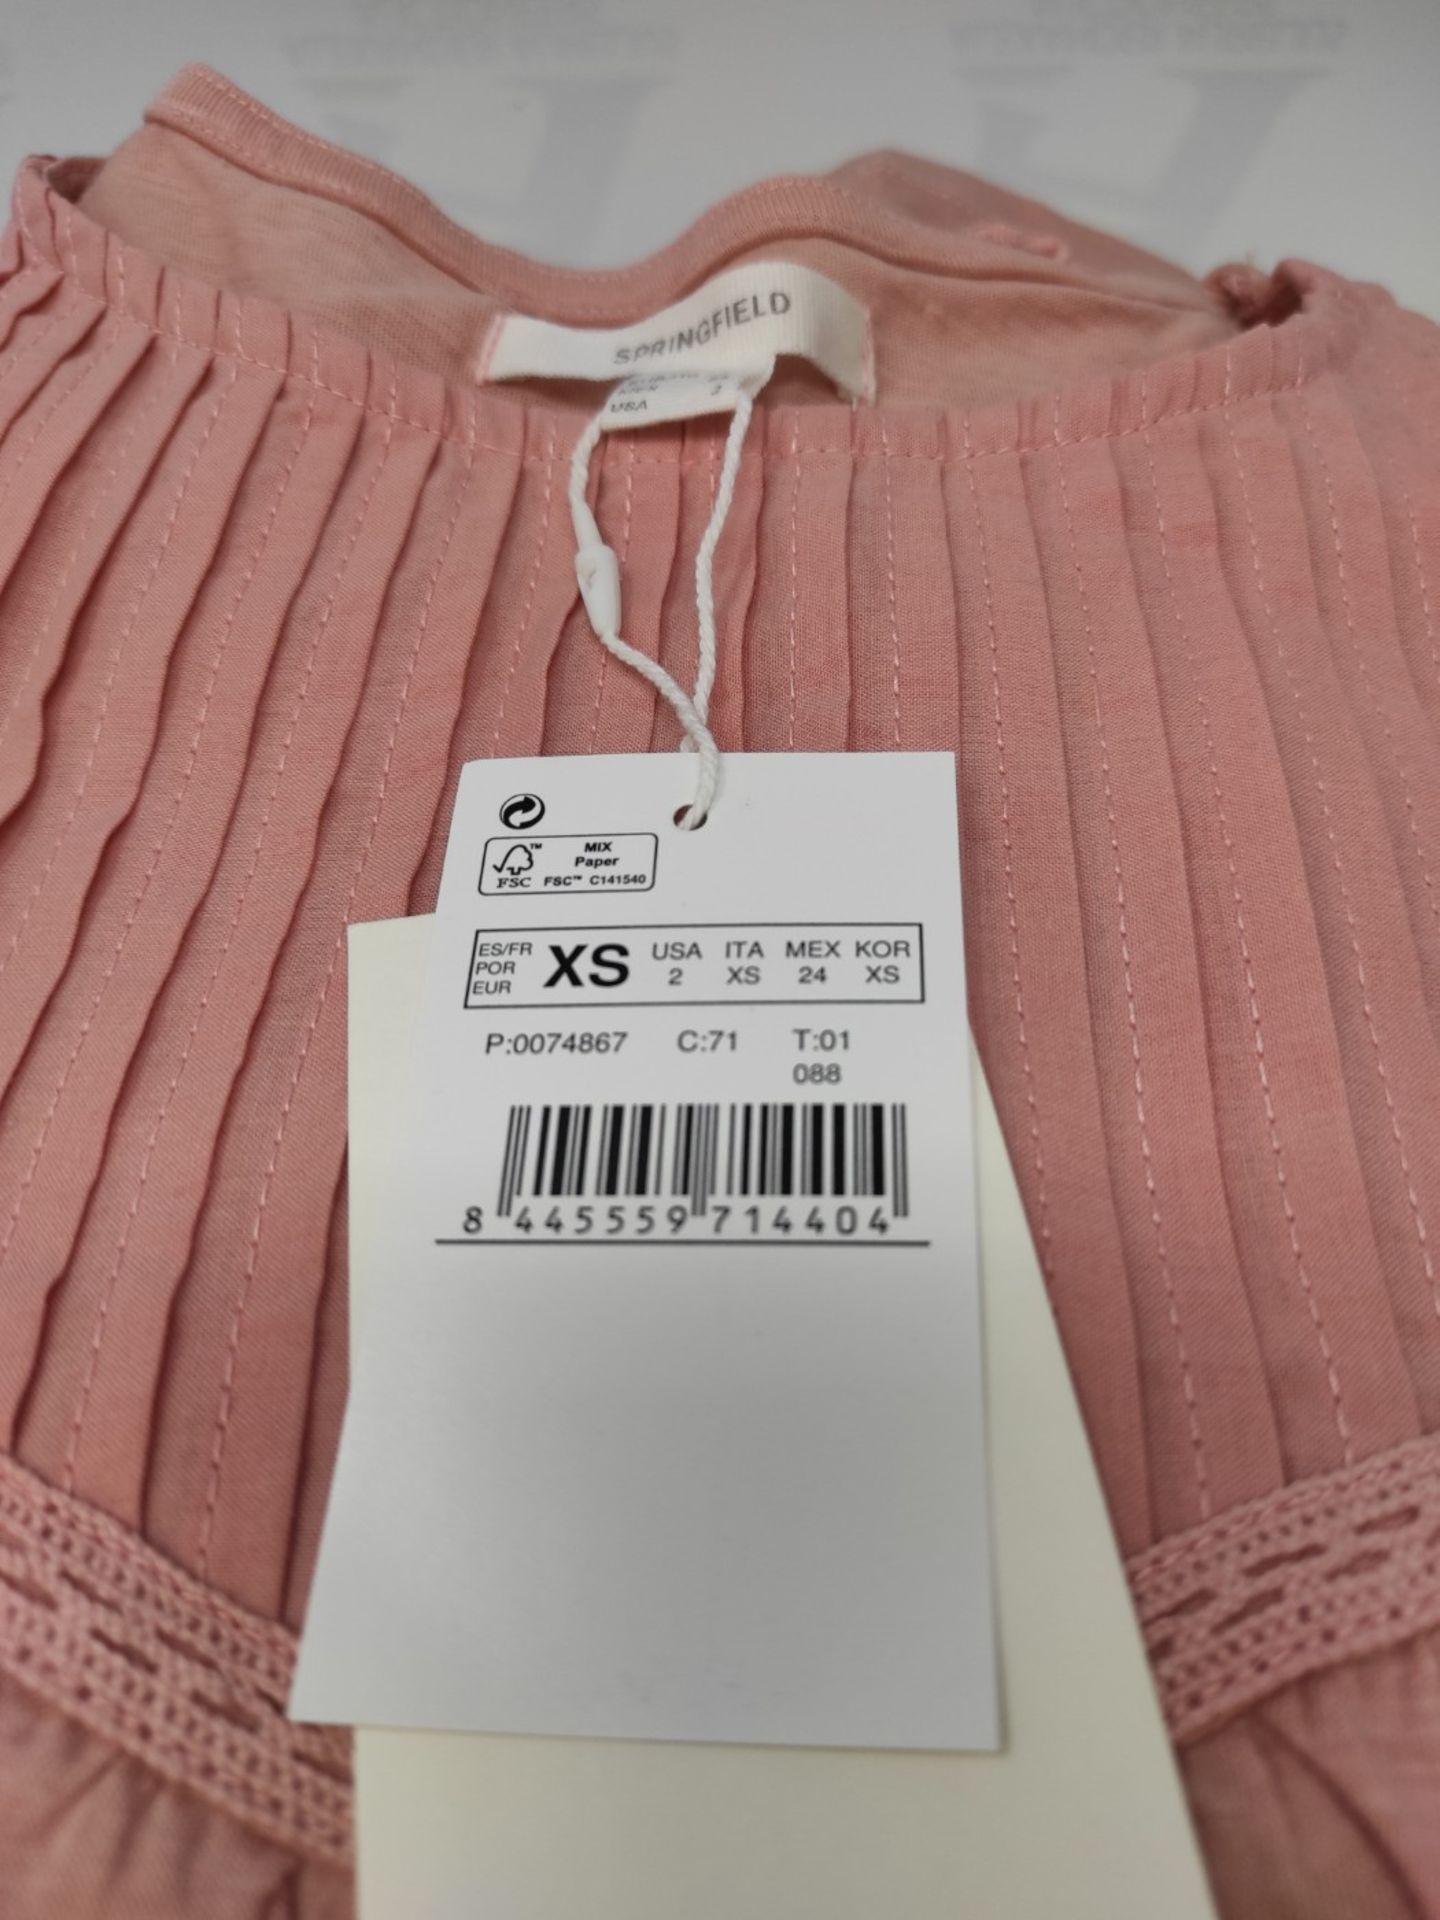 Springfield Pleated Bicolor Blouse T-Shirt, Pink, XS Woman - Image 3 of 6